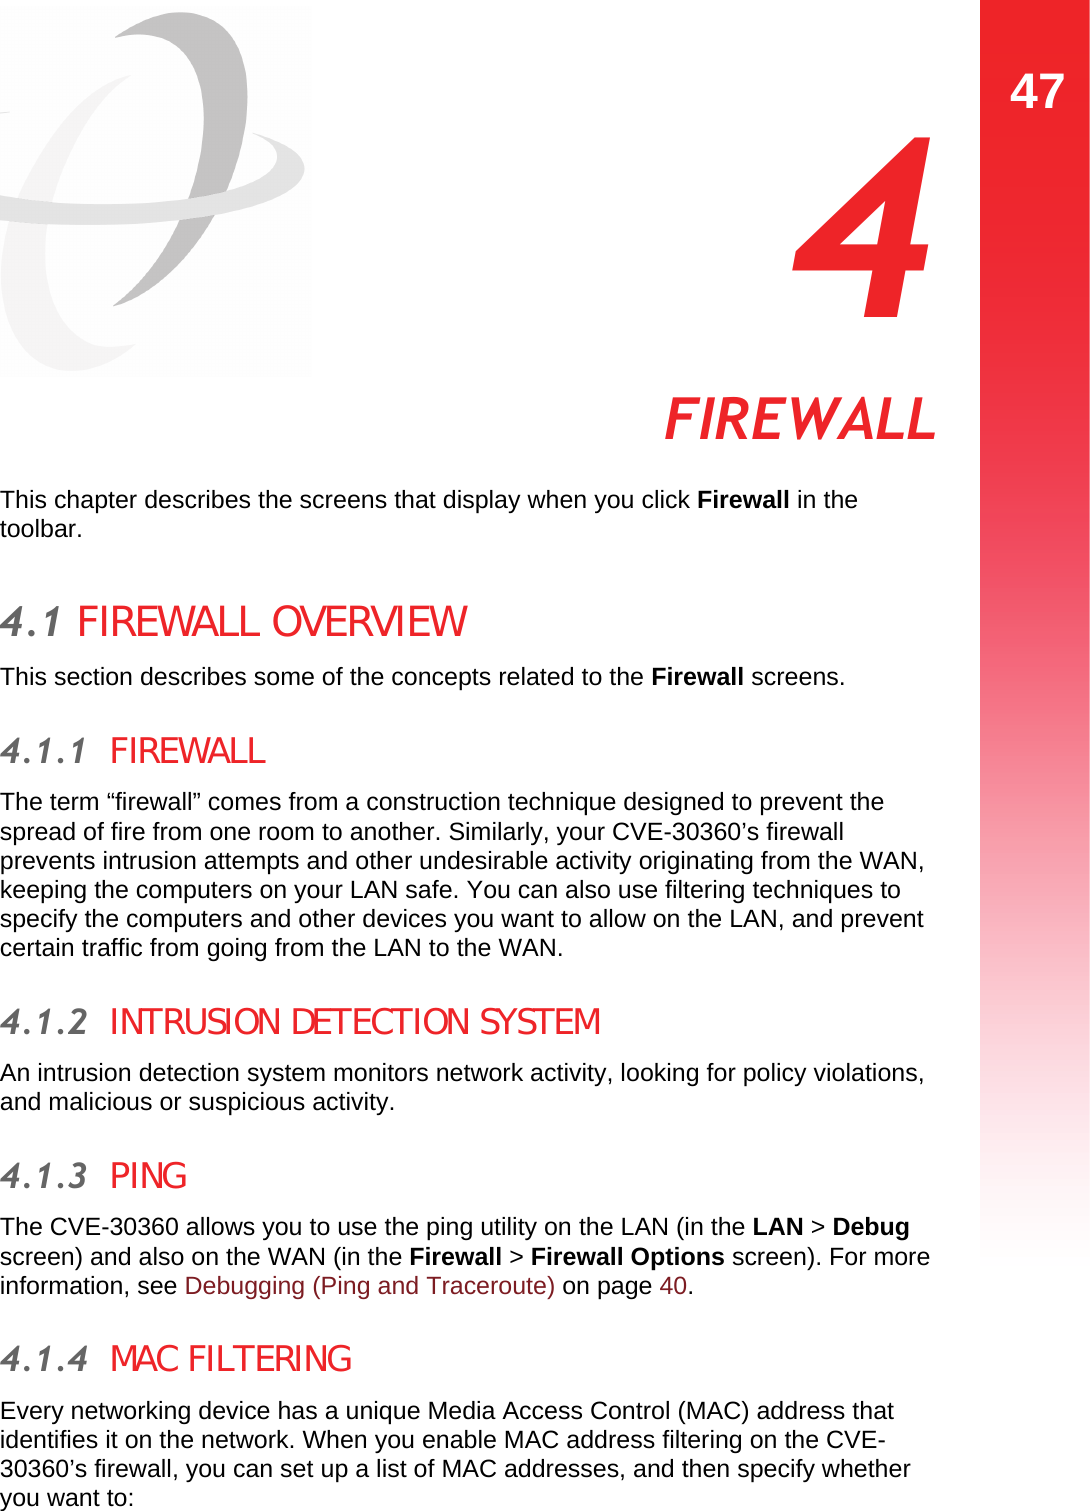 47FIREWALL  4 FIREWALLThis chapter describes the screens that display when you click Firewall in the toolbar.4.1 FIREWALL OVERVIEWThis section describes some of the concepts related to the Firewall screens.4.1.1  FIREWALLThe term “firewall” comes from a construction technique designed to prevent the spread of fire from one room to another. Similarly, your CVE-30360’s firewall prevents intrusion attempts and other undesirable activity originating from the WAN, keeping the computers on your LAN safe. You can also use filtering techniques to specify the computers and other devices you want to allow on the LAN, and prevent certain traffic from going from the LAN to the WAN.4.1.2  INTRUSION DETECTION SYSTEMAn intrusion detection system monitors network activity, looking for policy violations, and malicious or suspicious activity. 4.1.3  PINGThe CVE-30360 allows you to use the ping utility on the LAN (in the LAN &gt; Debug screen) and also on the WAN (in the Firewall &gt; Firewall Options screen). For more information, see Debugging (Ping and Traceroute) on page 40.4.1.4  MAC FILTERINGEvery networking device has a unique Media Access Control (MAC) address that identifies it on the network. When you enable MAC address filtering on the CVE-30360’s firewall, you can set up a list of MAC addresses, and then specify whether you want to: